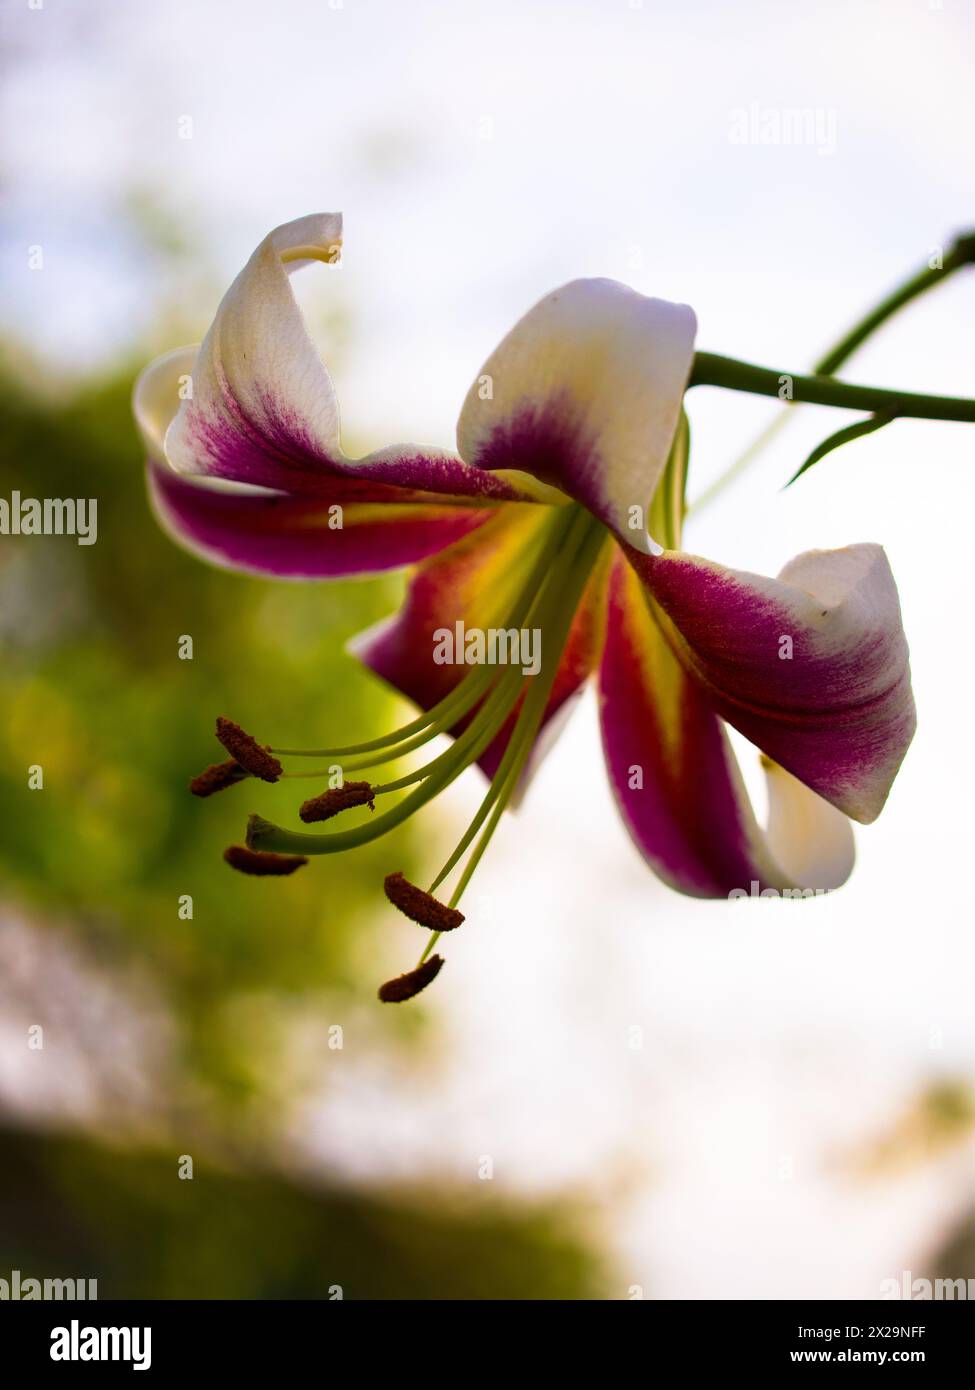 An elegant lily blossoms, revealing white petals edged with purple and long stamens amidst a serene natural setting. Apt for nature-inspired artwork o Stock Photo